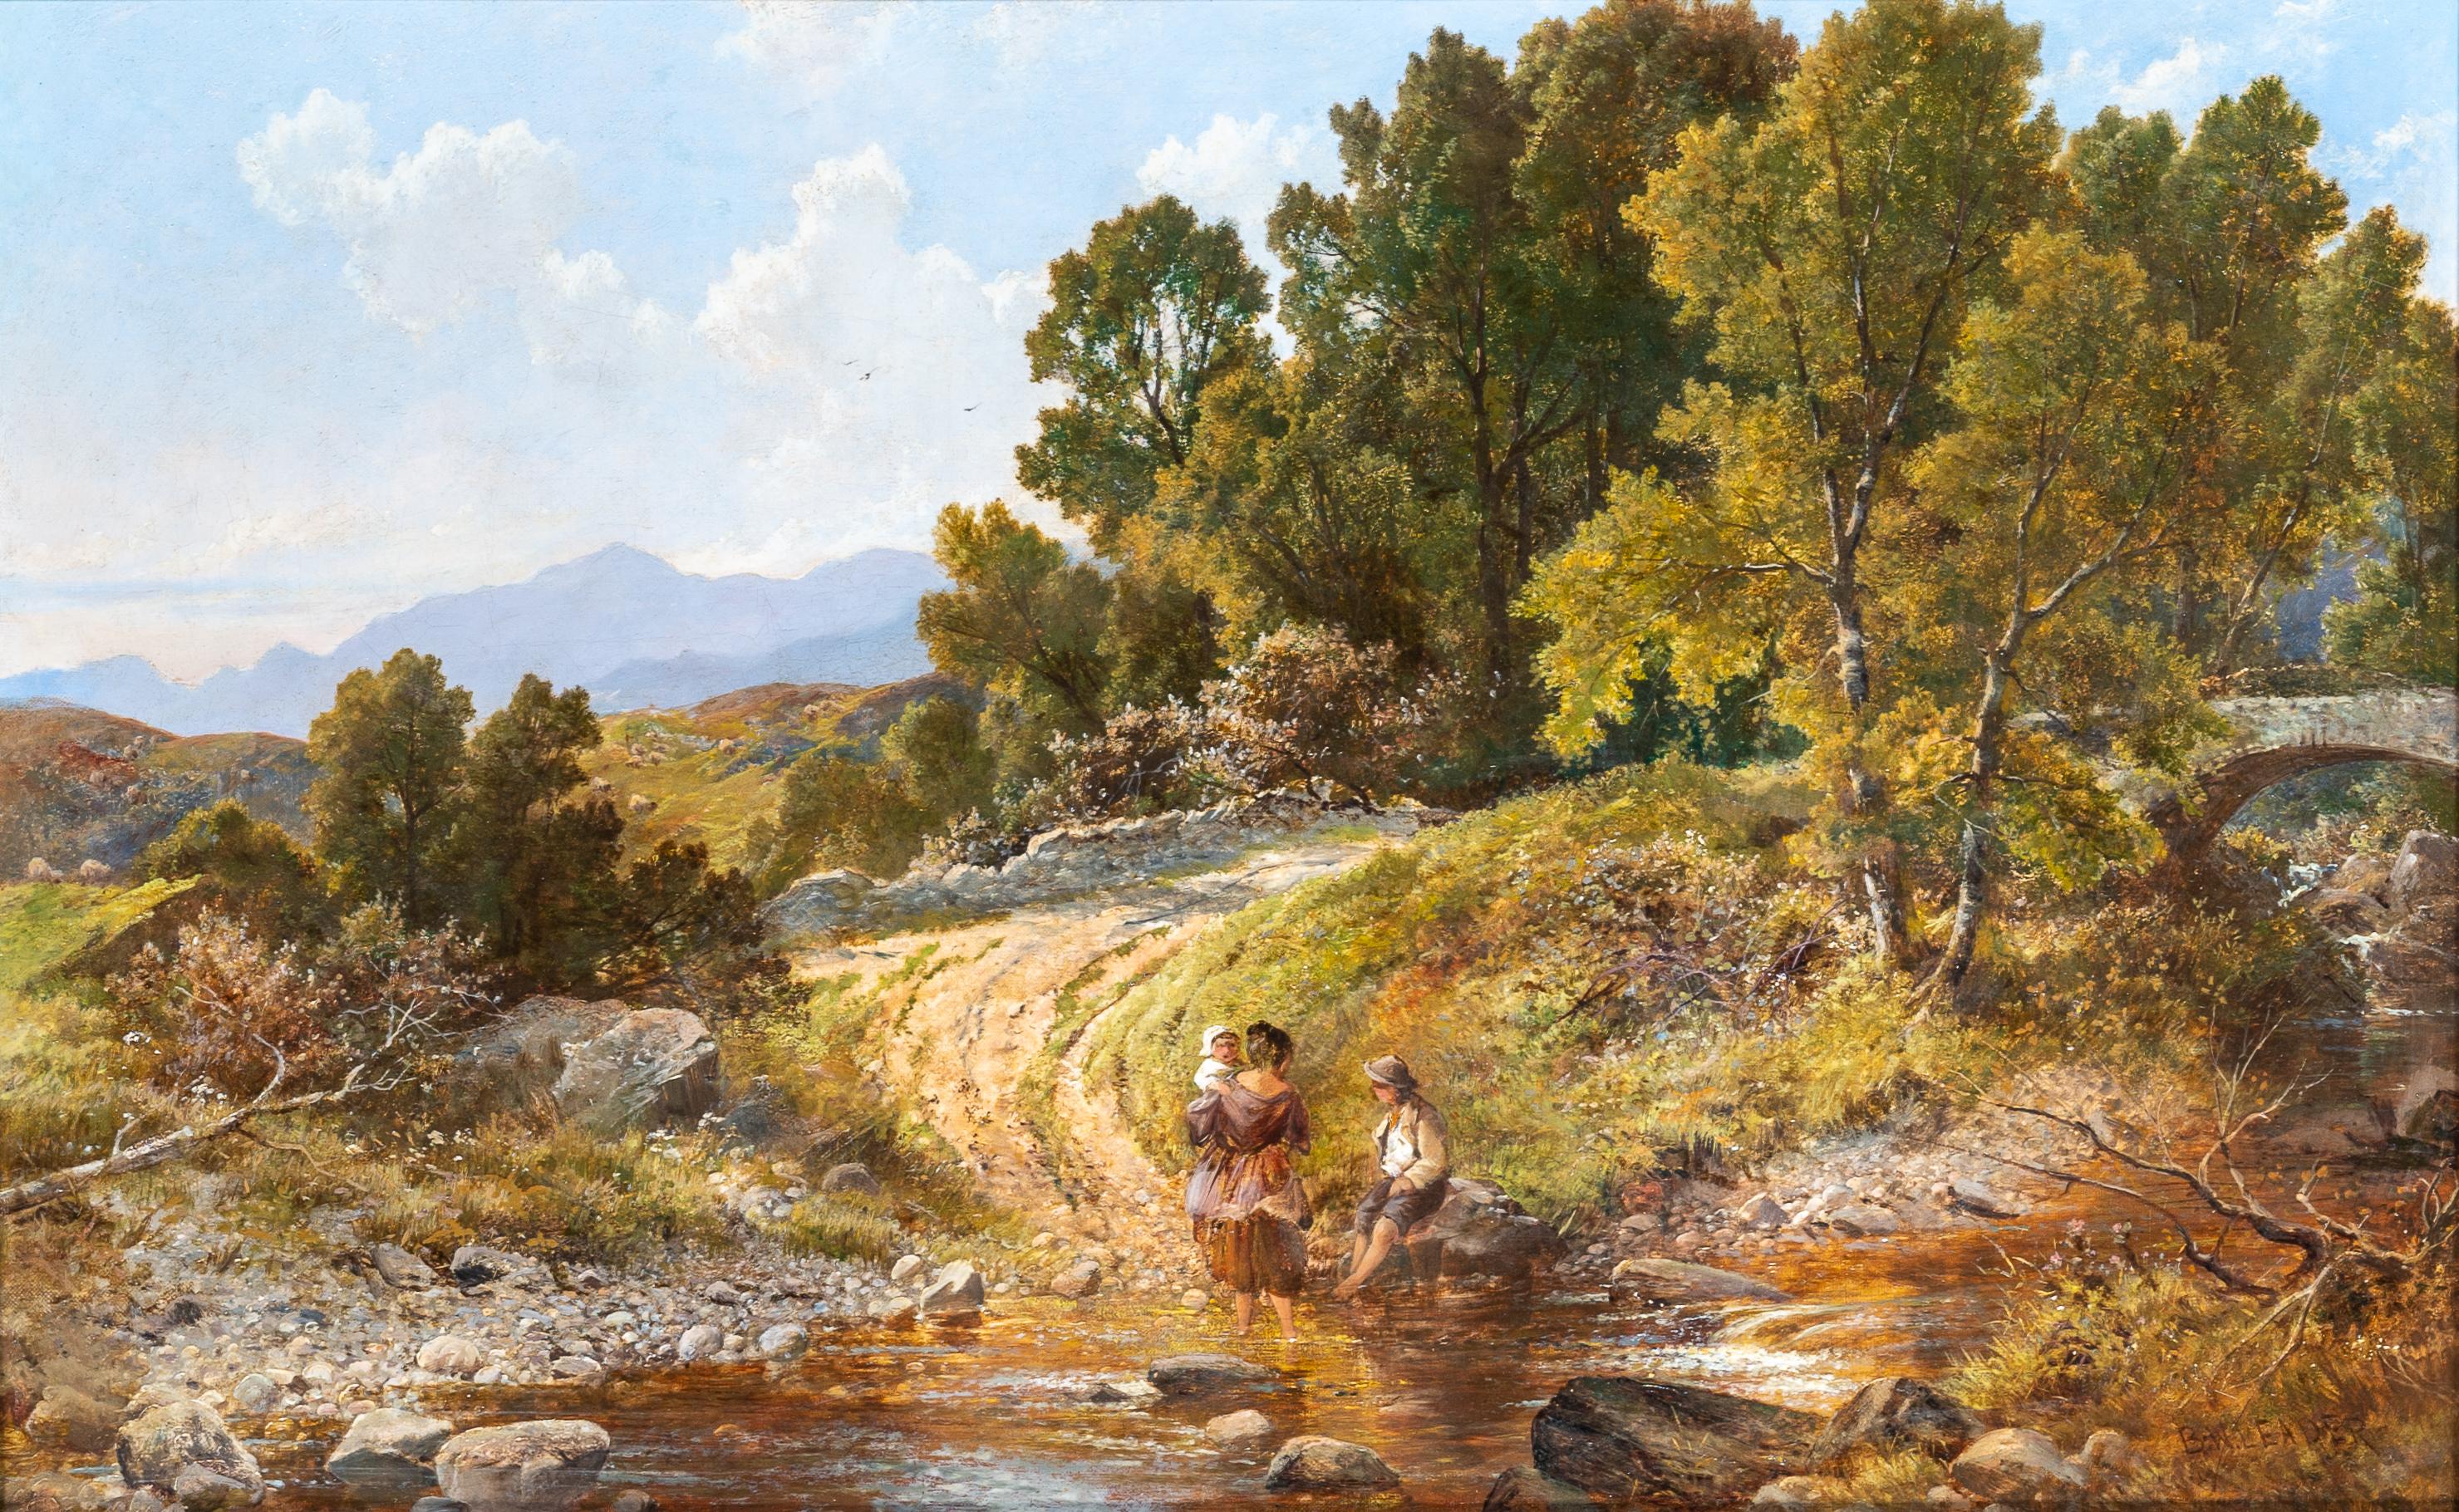 'Wading in the River' 19th century landscape painting of figures, greenery - Painting by Benjamin Williams Leader